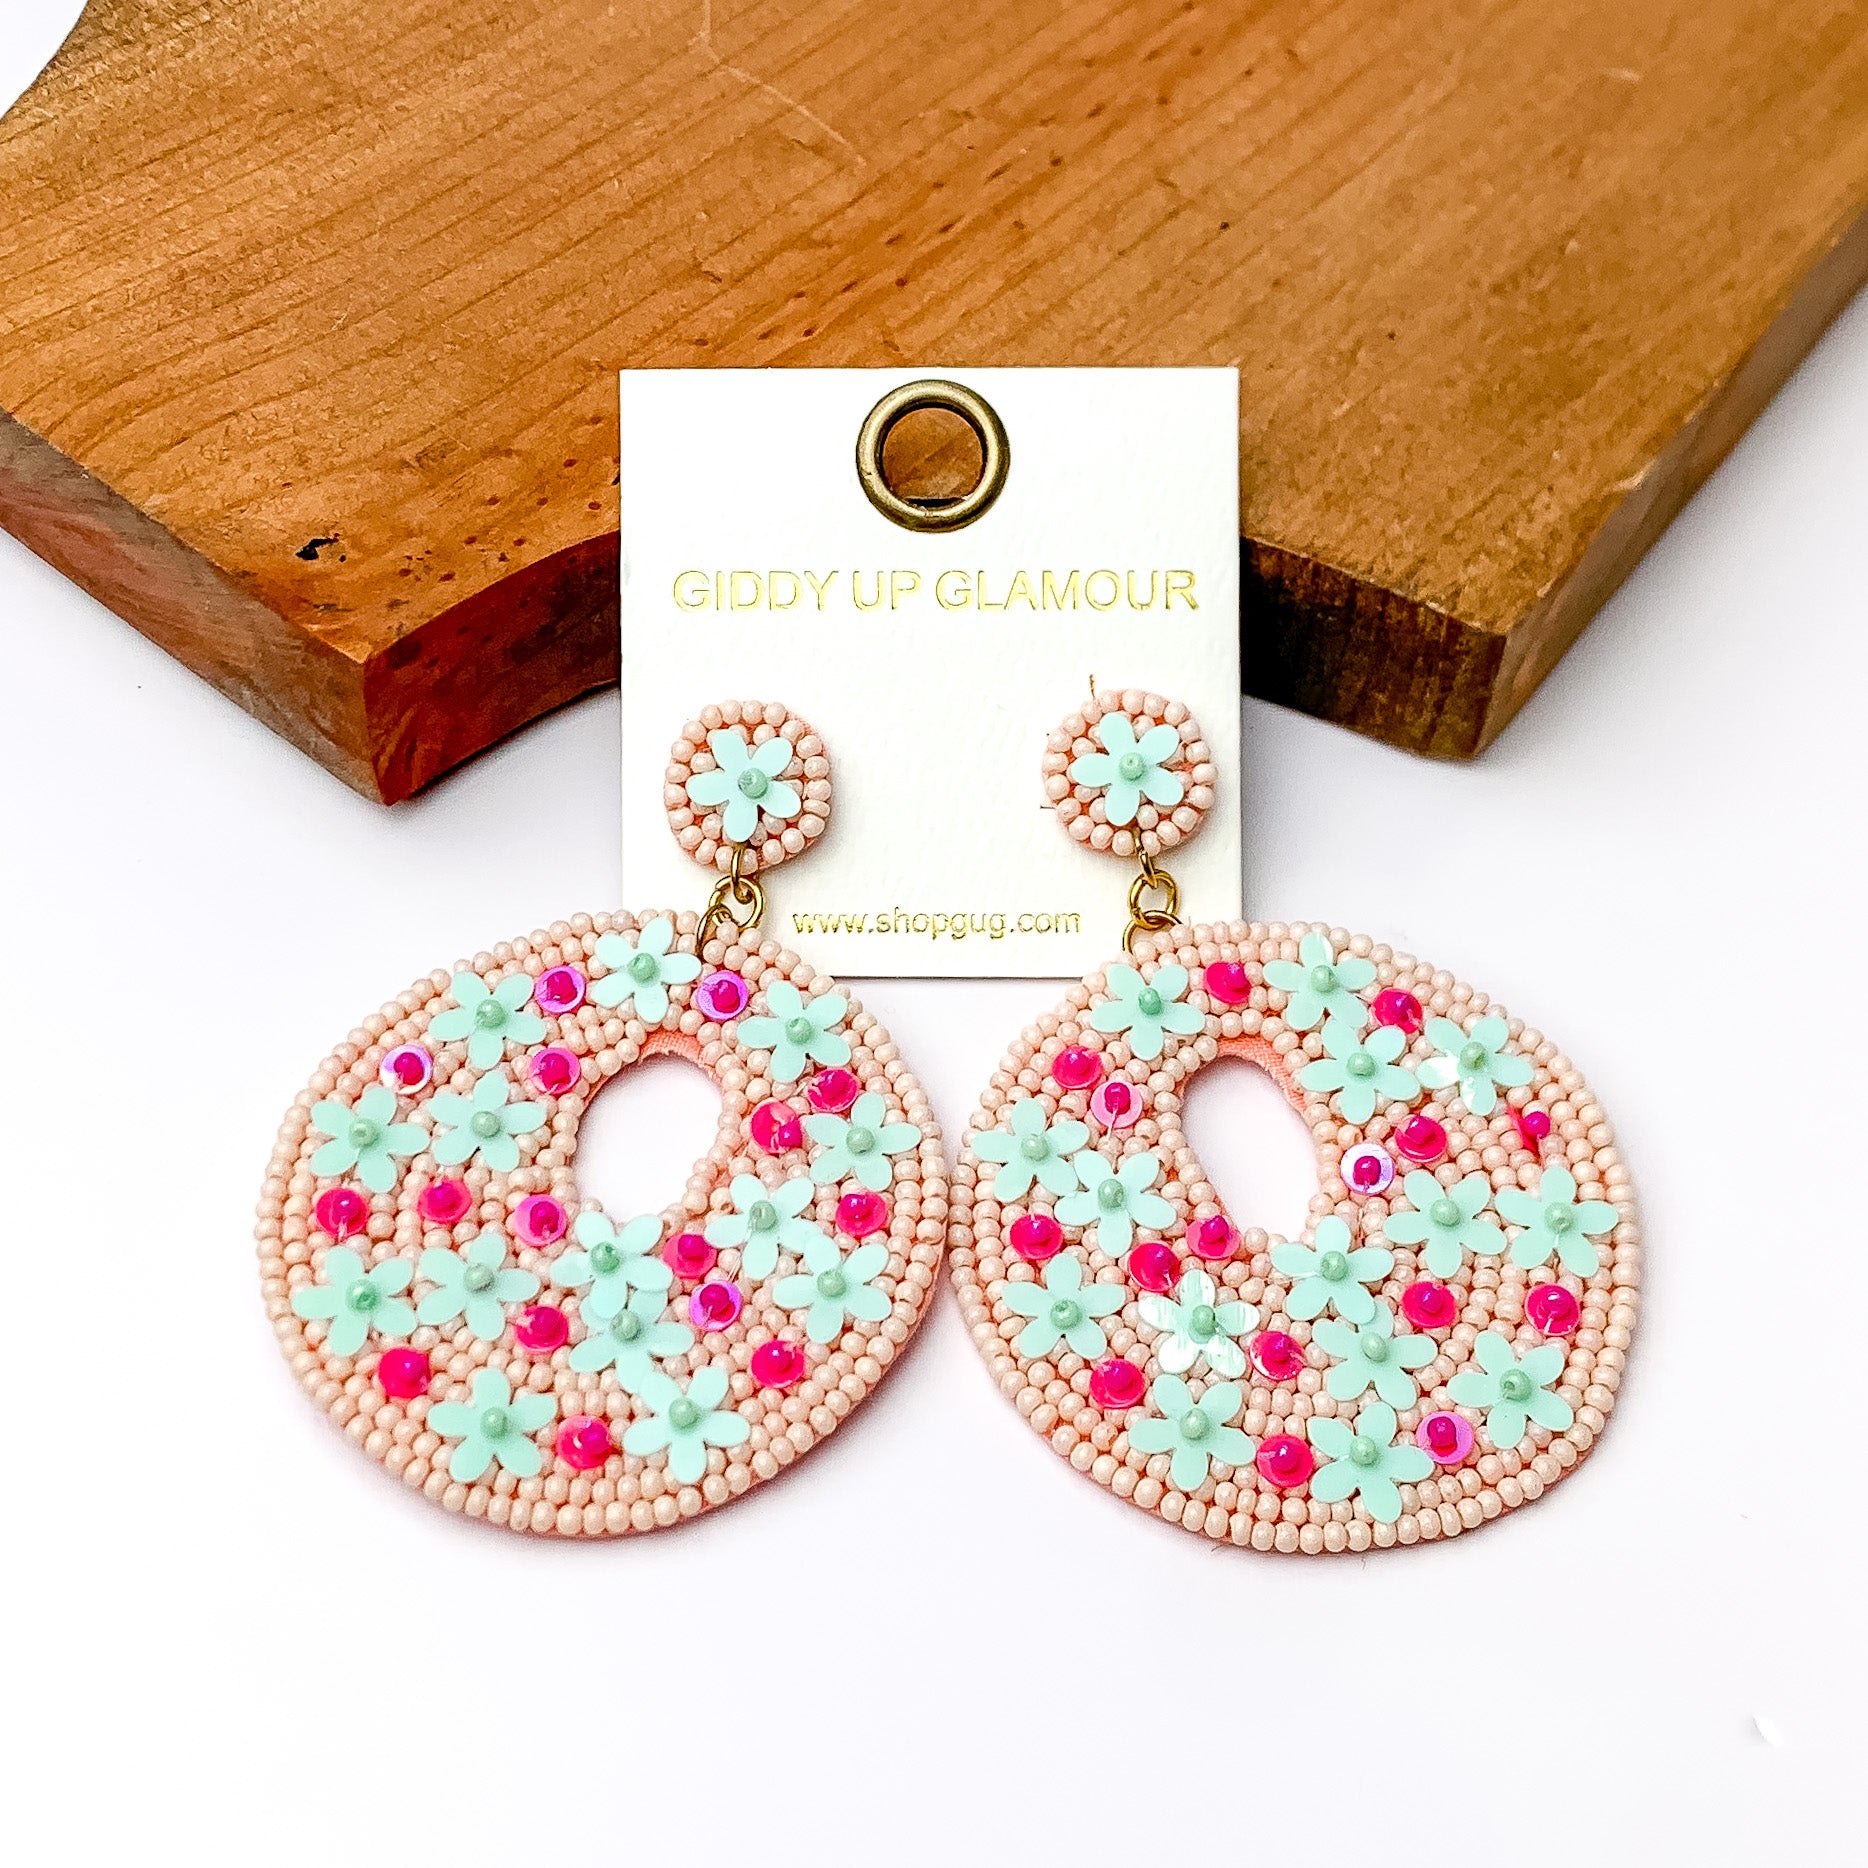 Light pink beaded circular drop earrings with pink and blue designs. Pictured on a white background with a wood piece at the top.